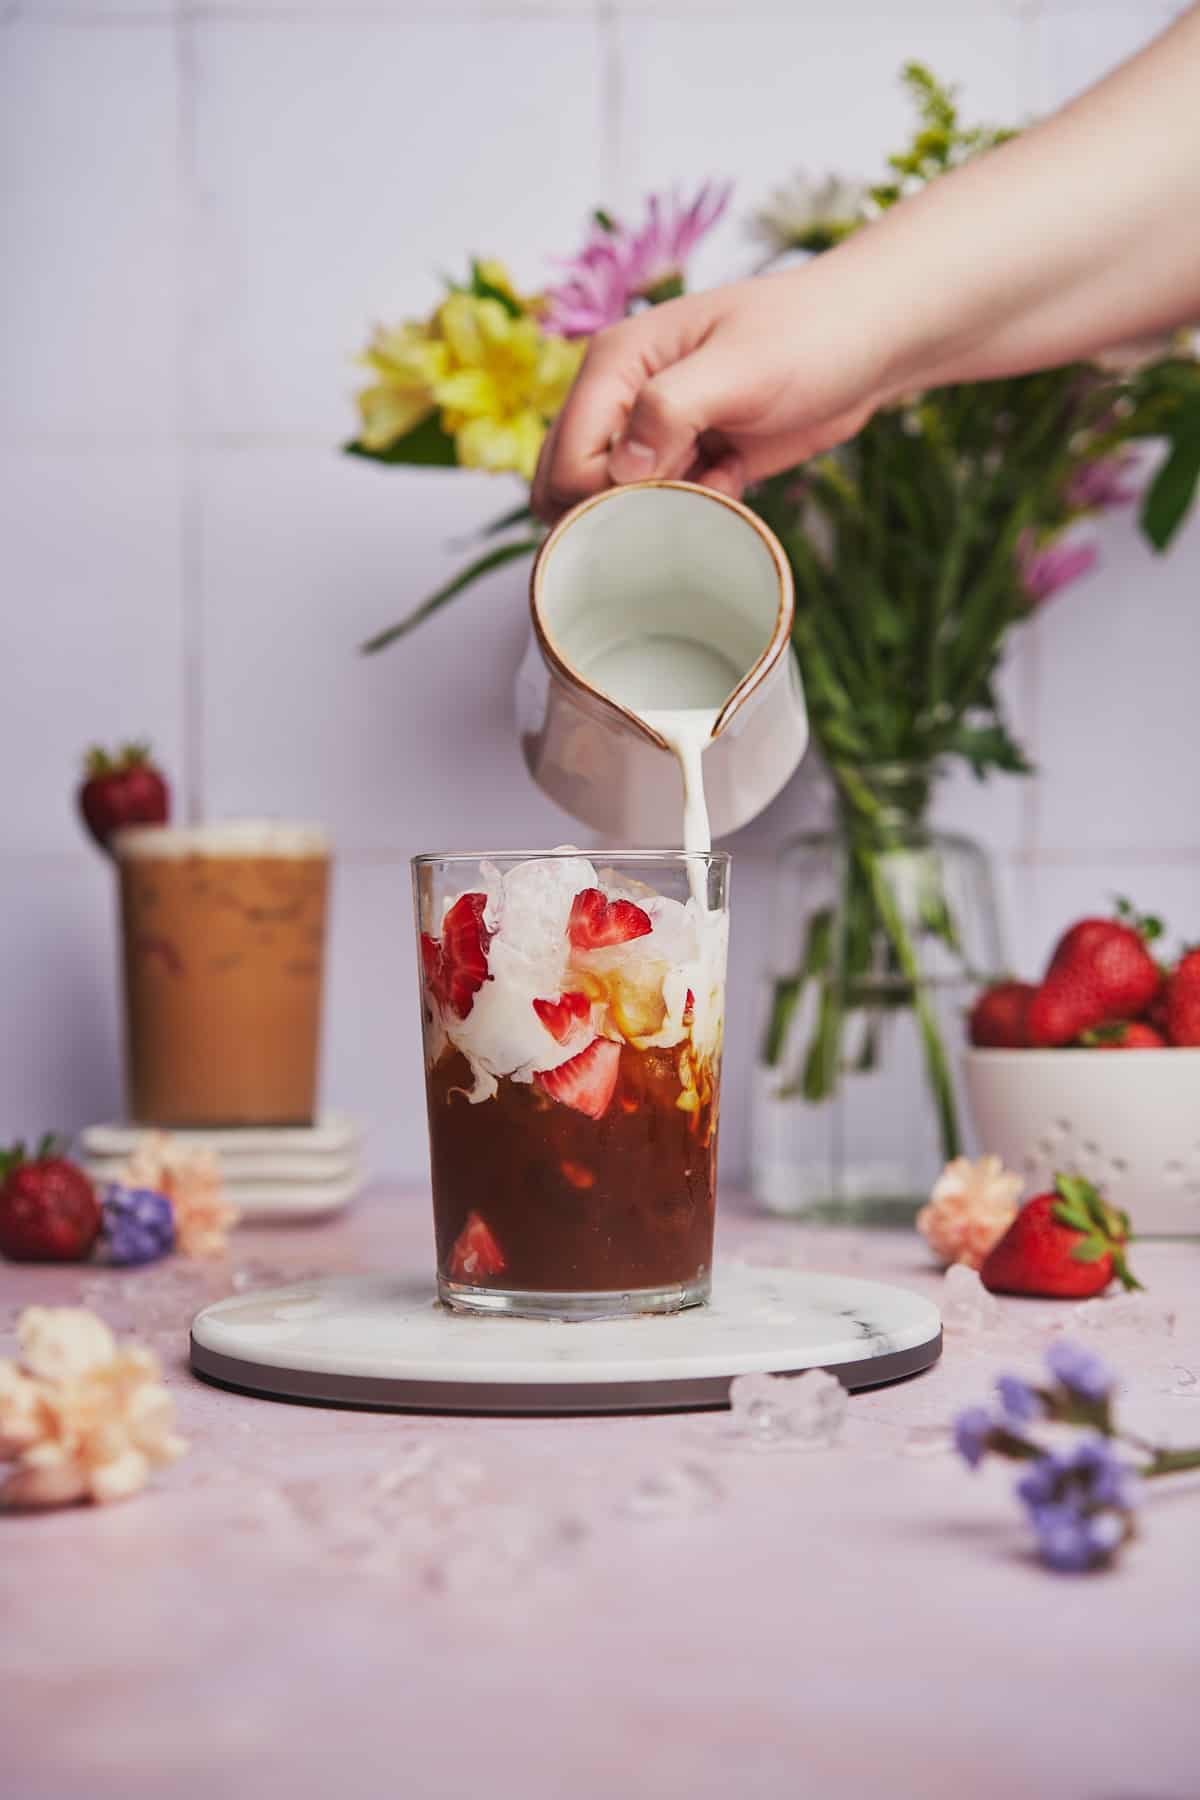 creamy strawberry latte recipe, with a hand pouring cold foam over top of a strawberry filled iced latte, and flowers and fresh strawberries in the back.